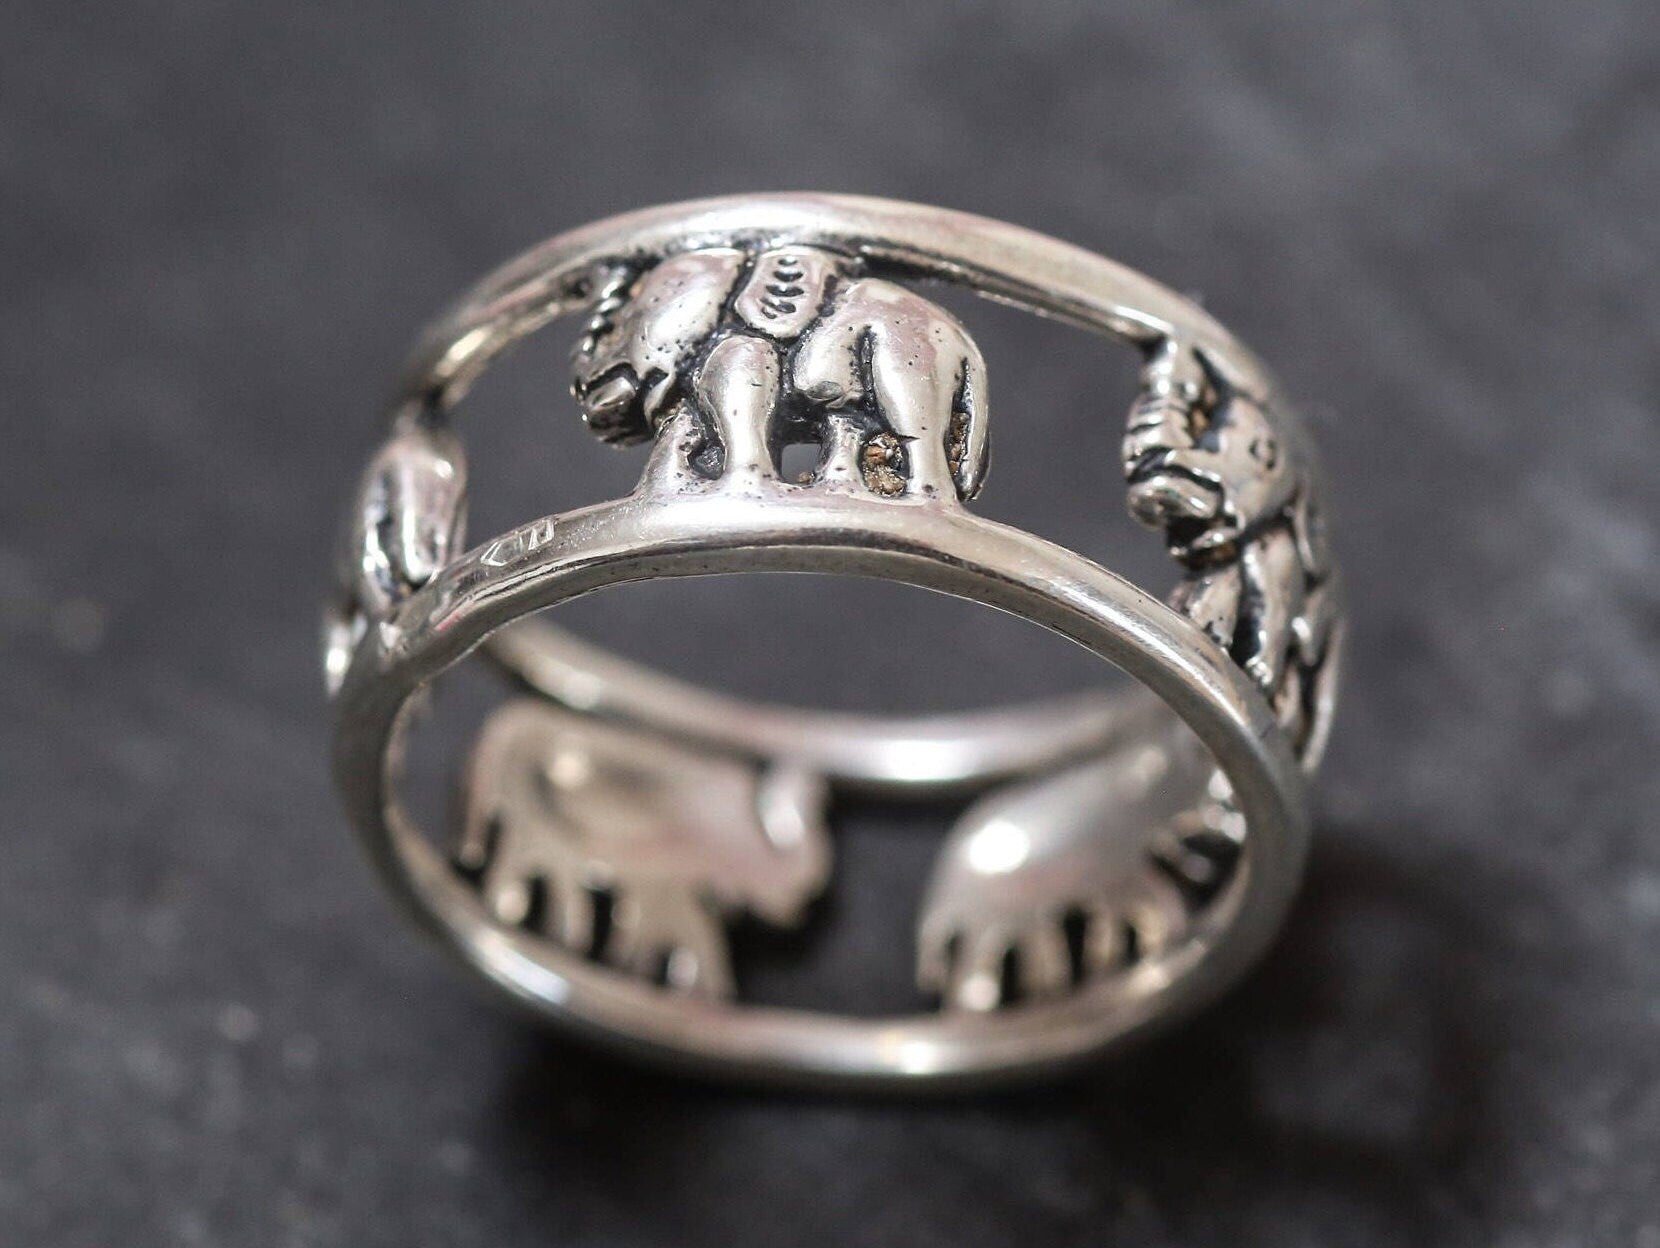 Elephant Ring, Solid Silver Ring, Sterling Silver Ring, Vintage Band, Oriental Ring, Orient Ring, Elephants Ring, Silver Band, 925 Silver